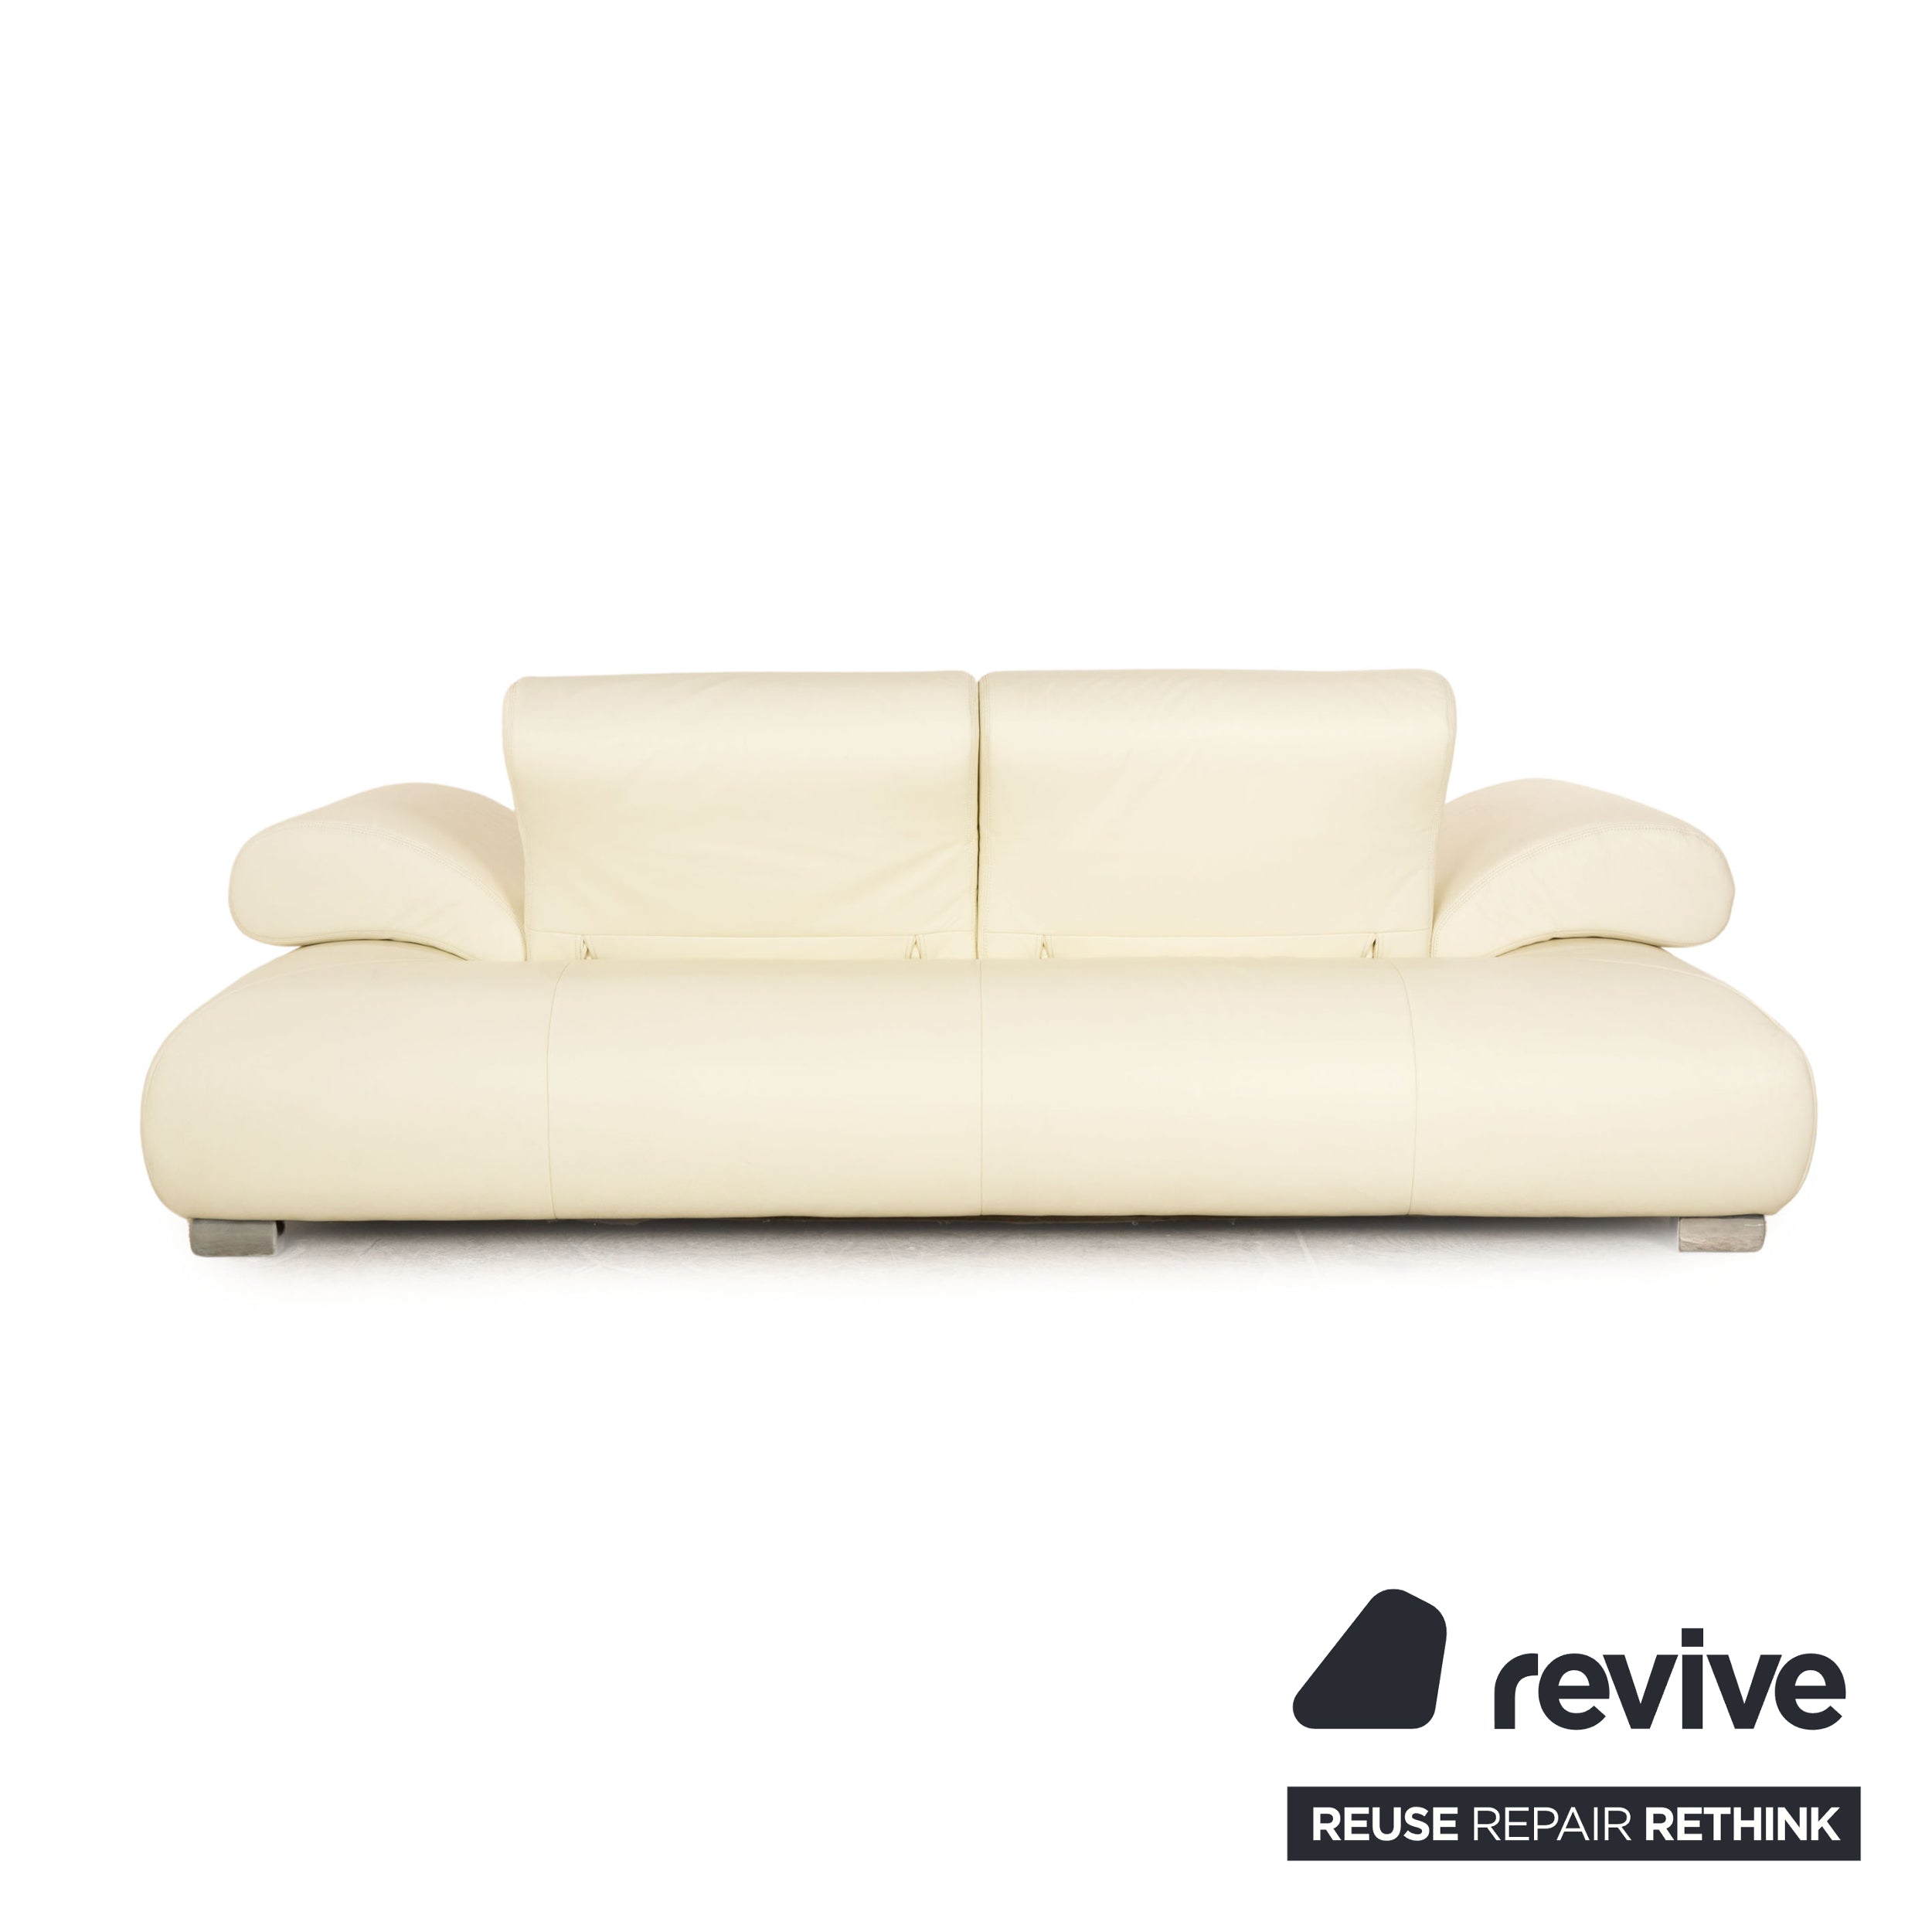 Koinor Diva Sofa Leather White Cream Two Seater Manual Function Couch